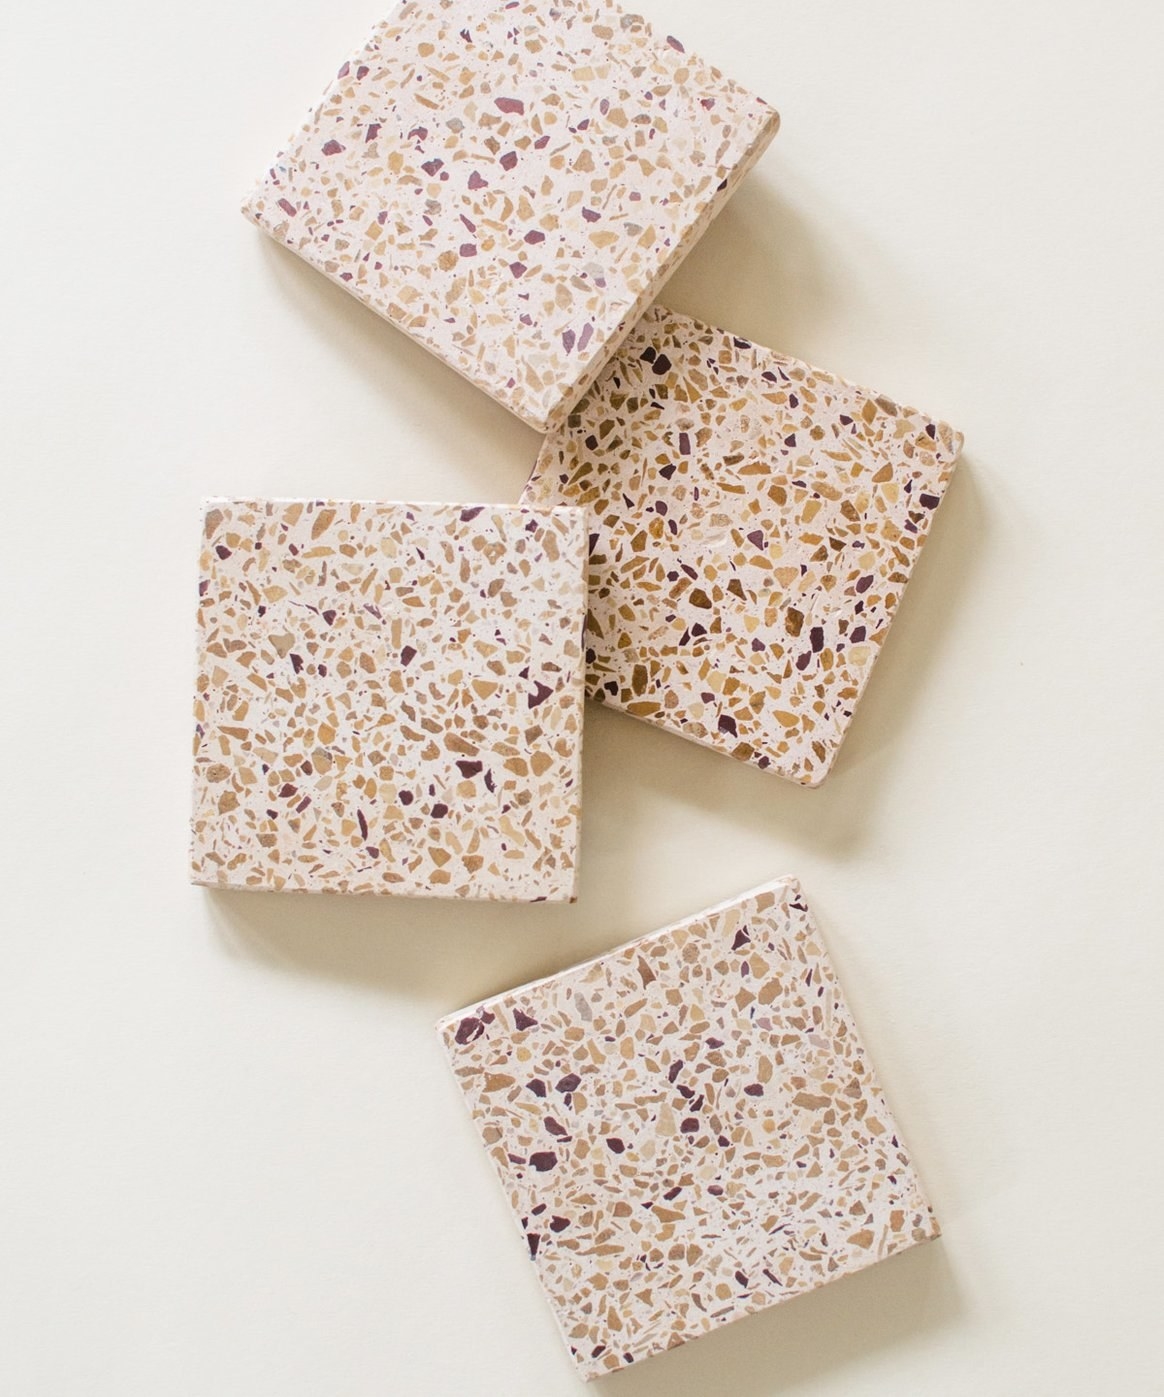 Four square coasters made of terrazzo stone in tan with specks of browns all over them